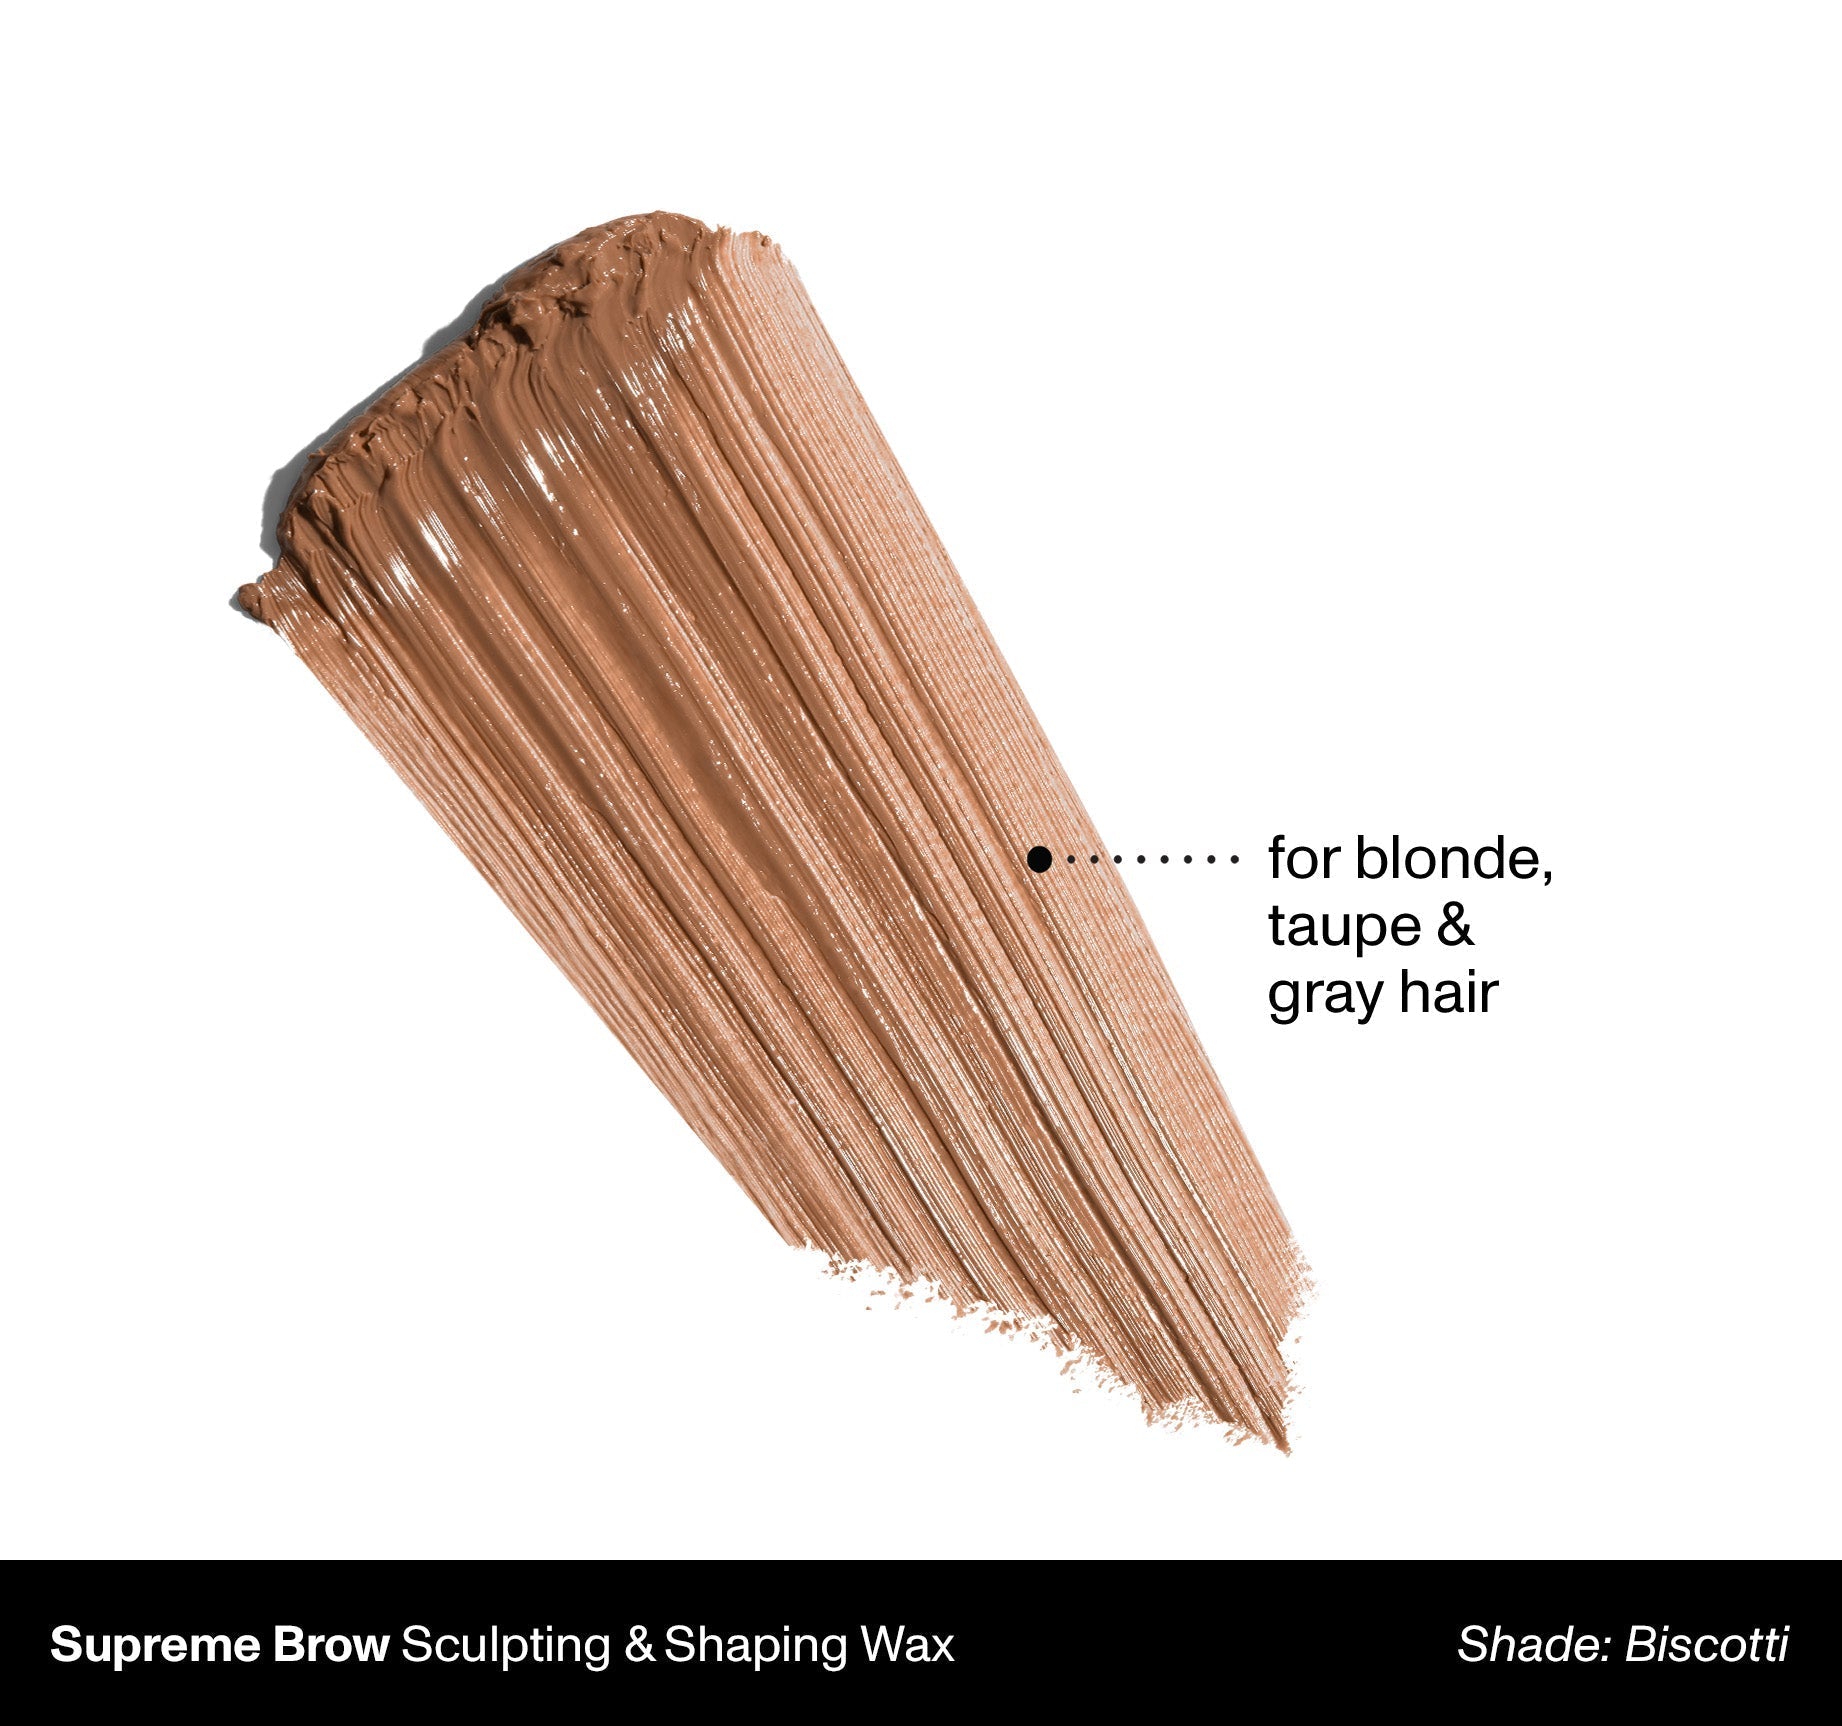 Supreme Brow Sculpting And Shaping Wax - Biscotti - Image 2